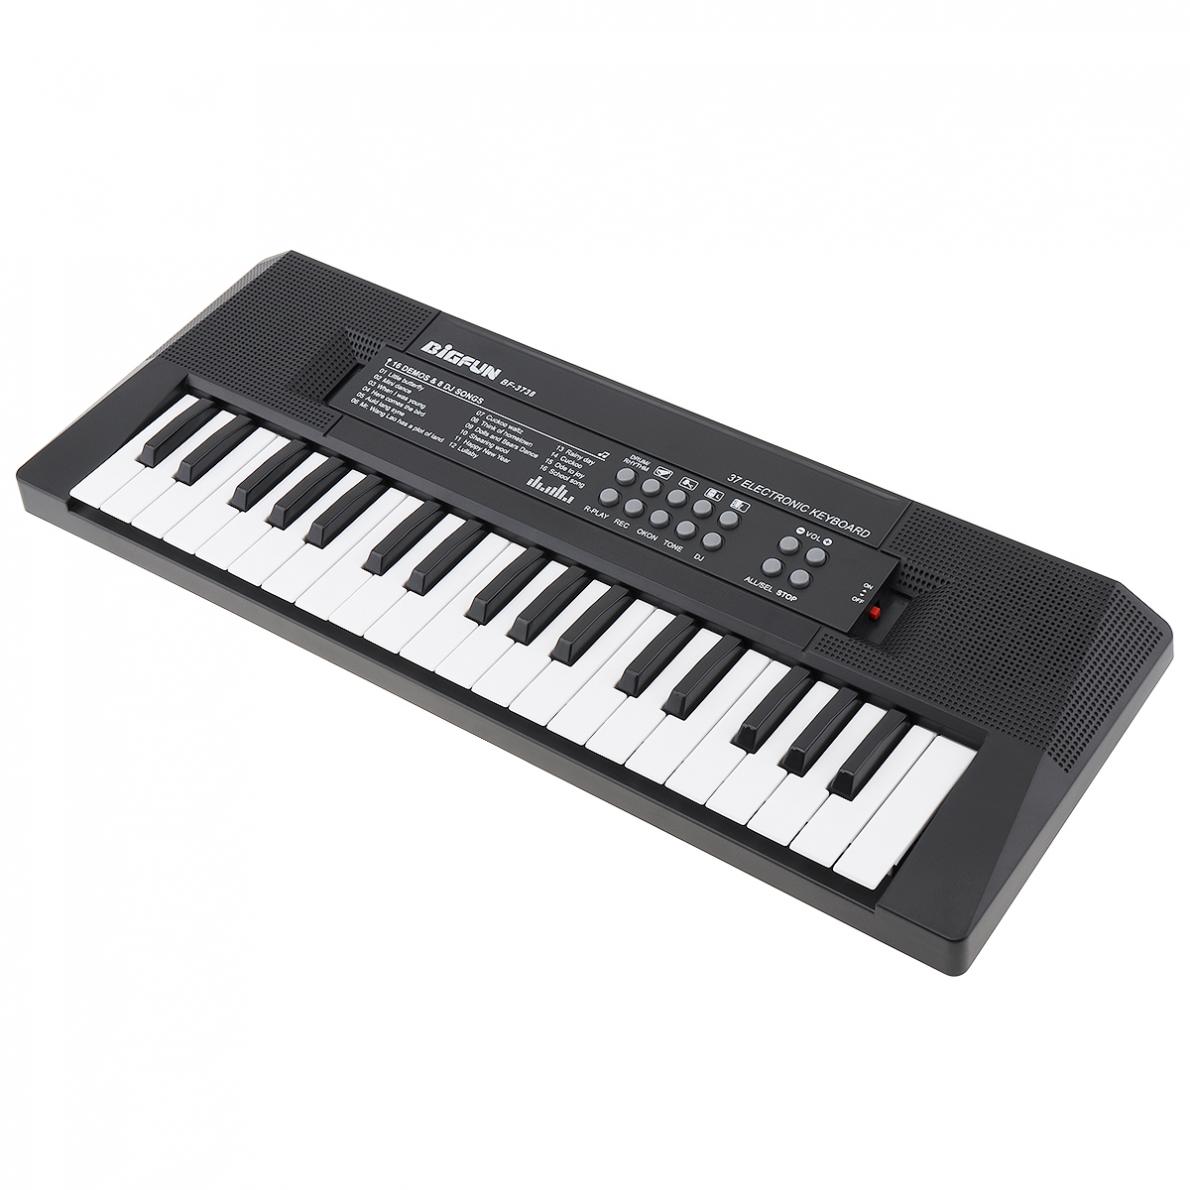 Electronic Organ 37 Keys Electronic Keyboard Piano Digital Music Key Board with Microphone Children Gift Musical Enlightenment